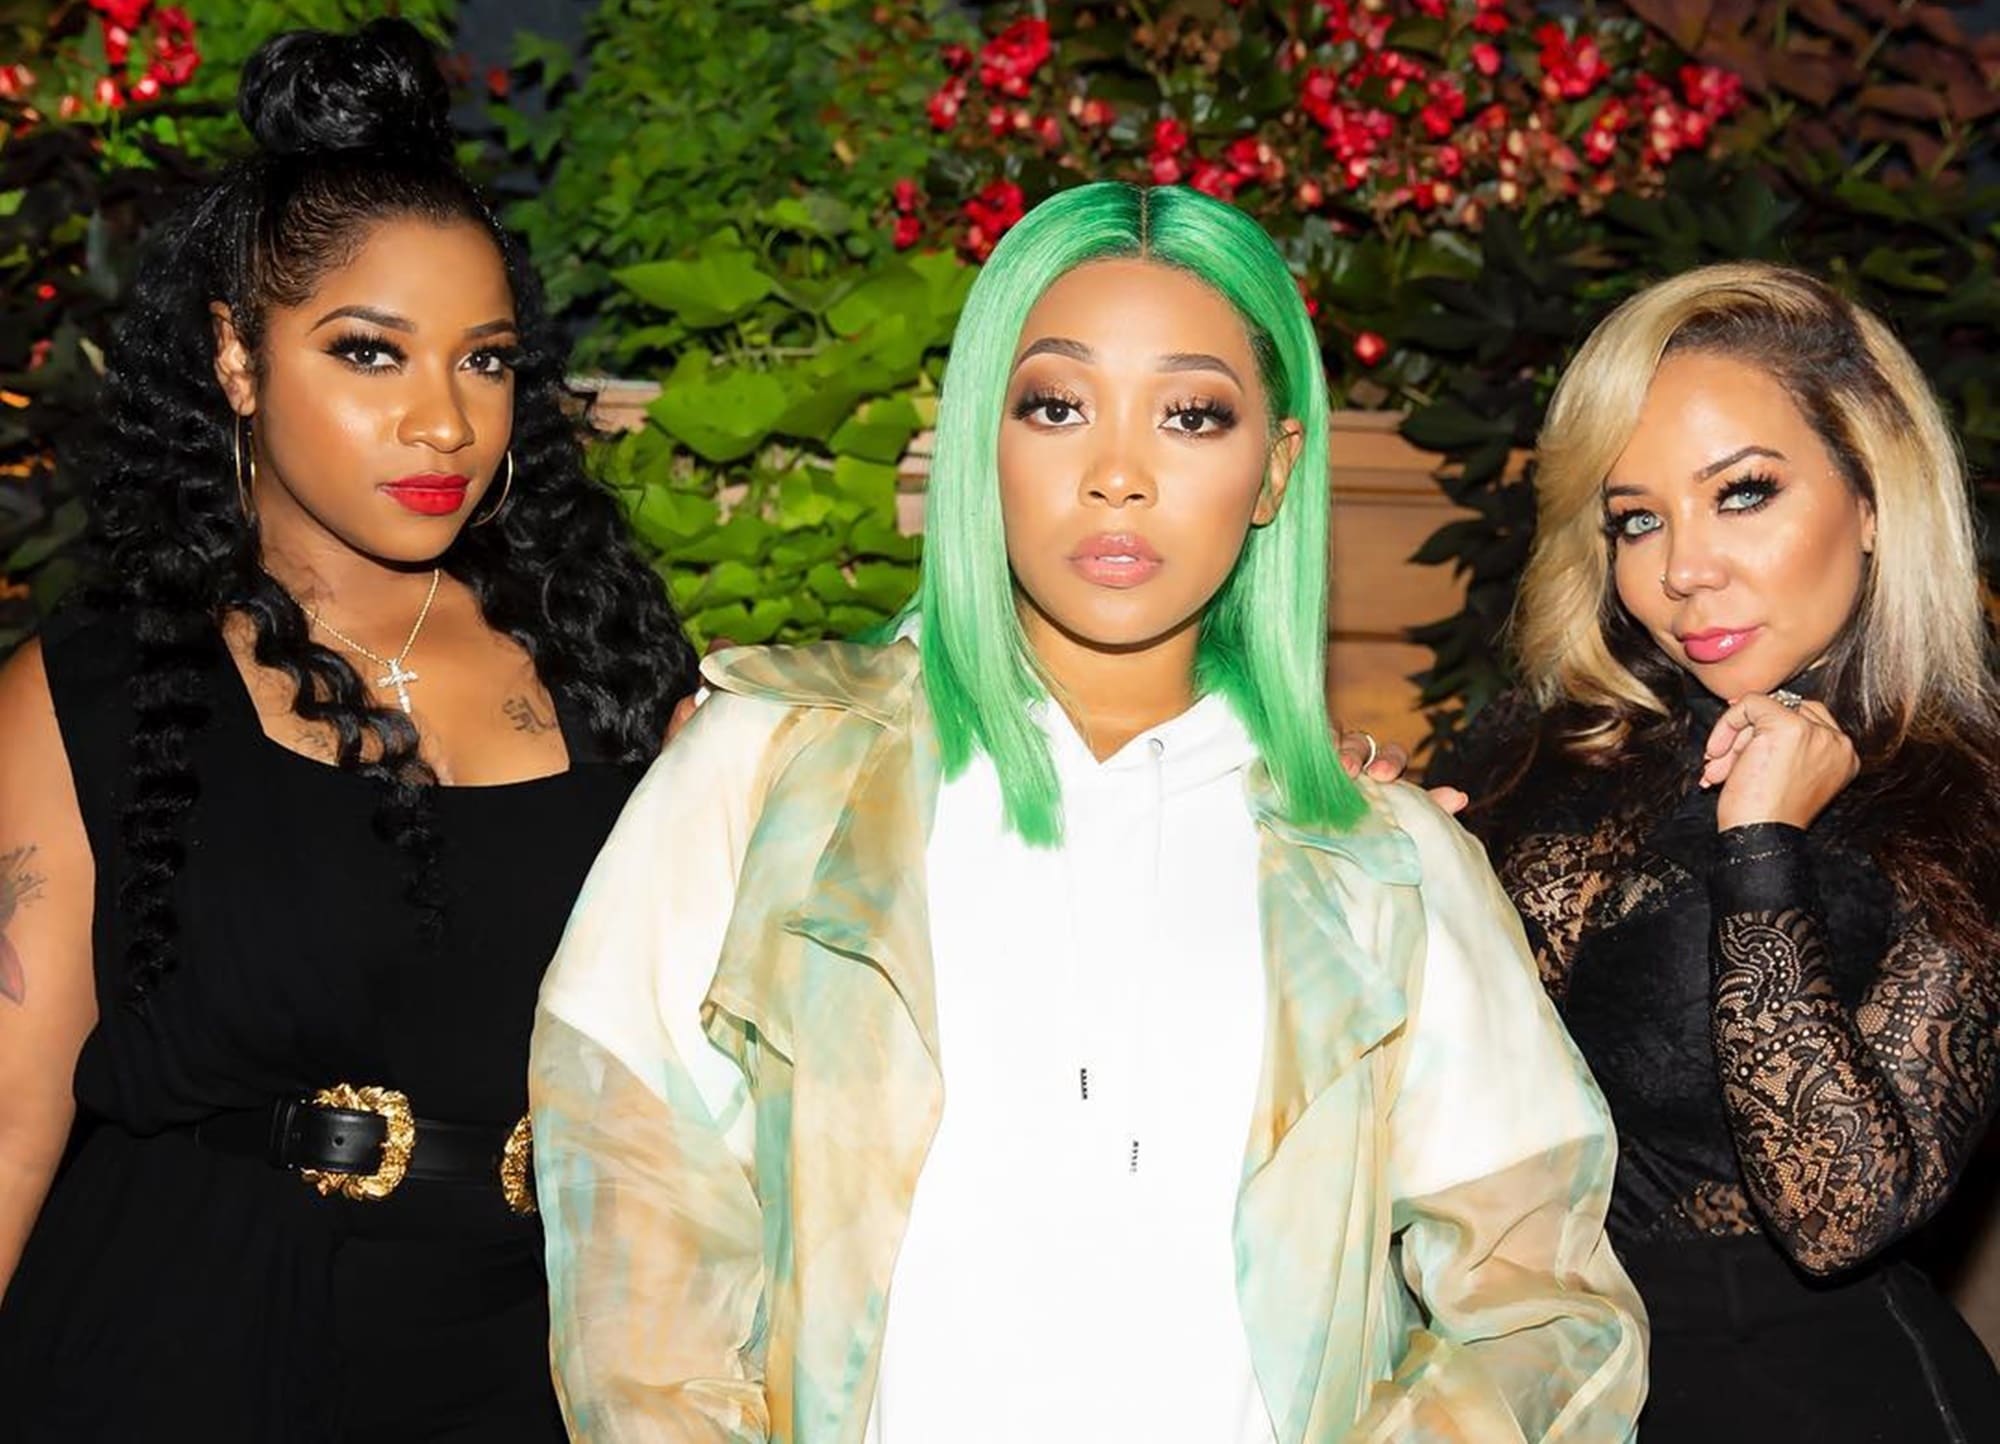 Tiny Harris Wishes All The Best To Toya Wright & Robert Rushing - She Celebrates Their Engagement With Gorgeous Pics And Fans Criticize Monica Brown's Look